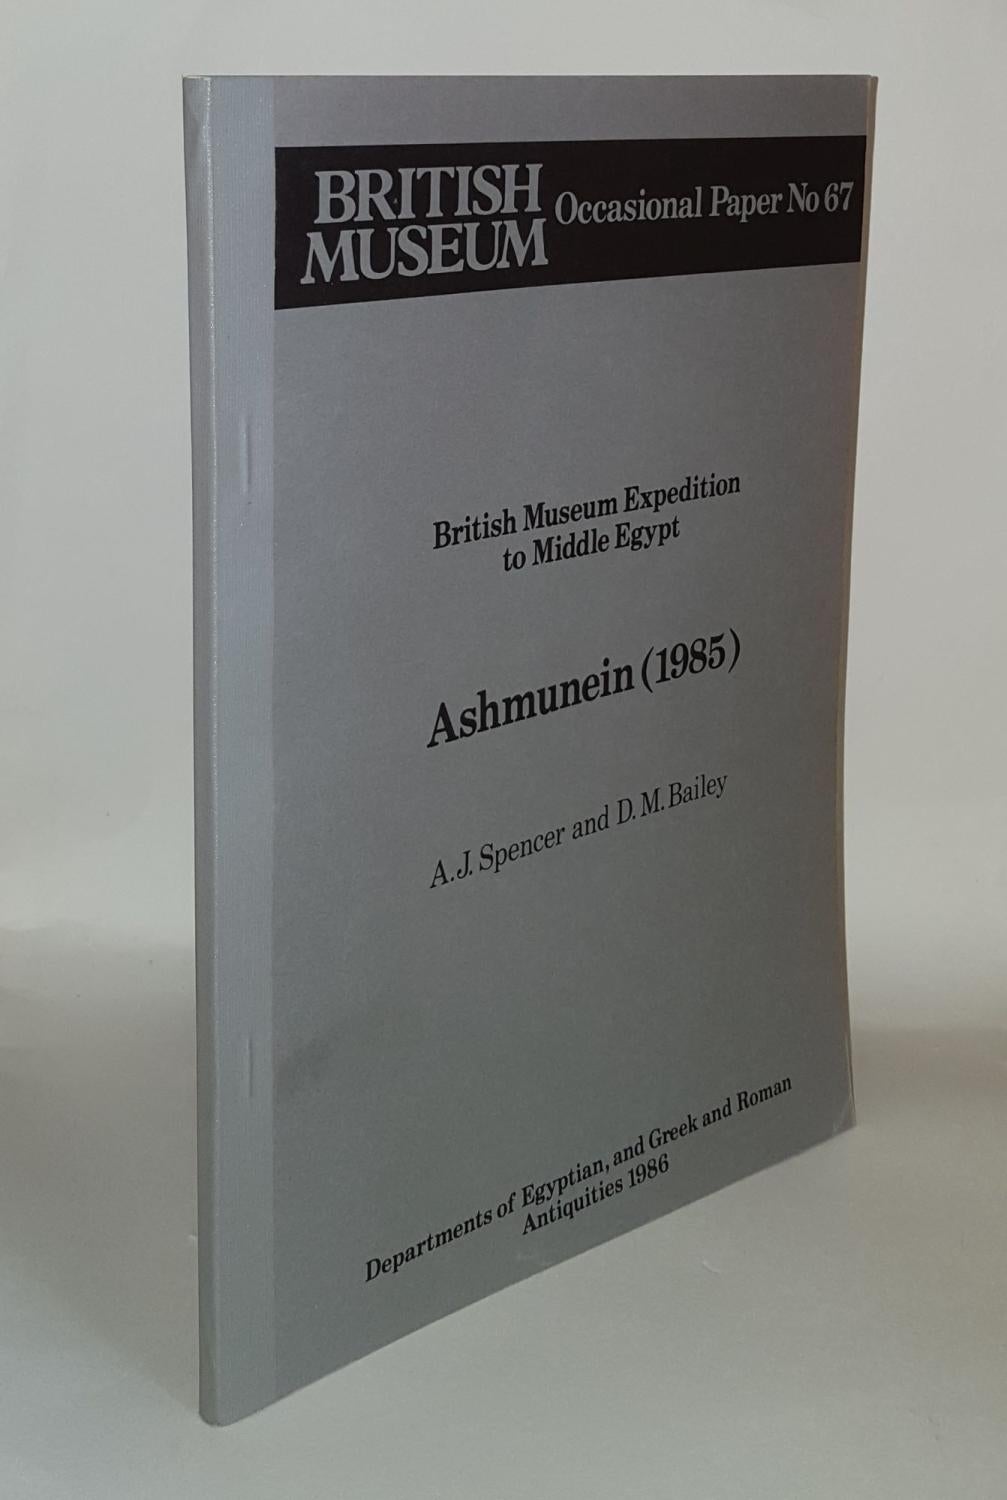 SPENCER A.J., BAILEY Donald - Ashmunein 1985 British Museum Expedition to Middle Egypt Occasional Paper 67